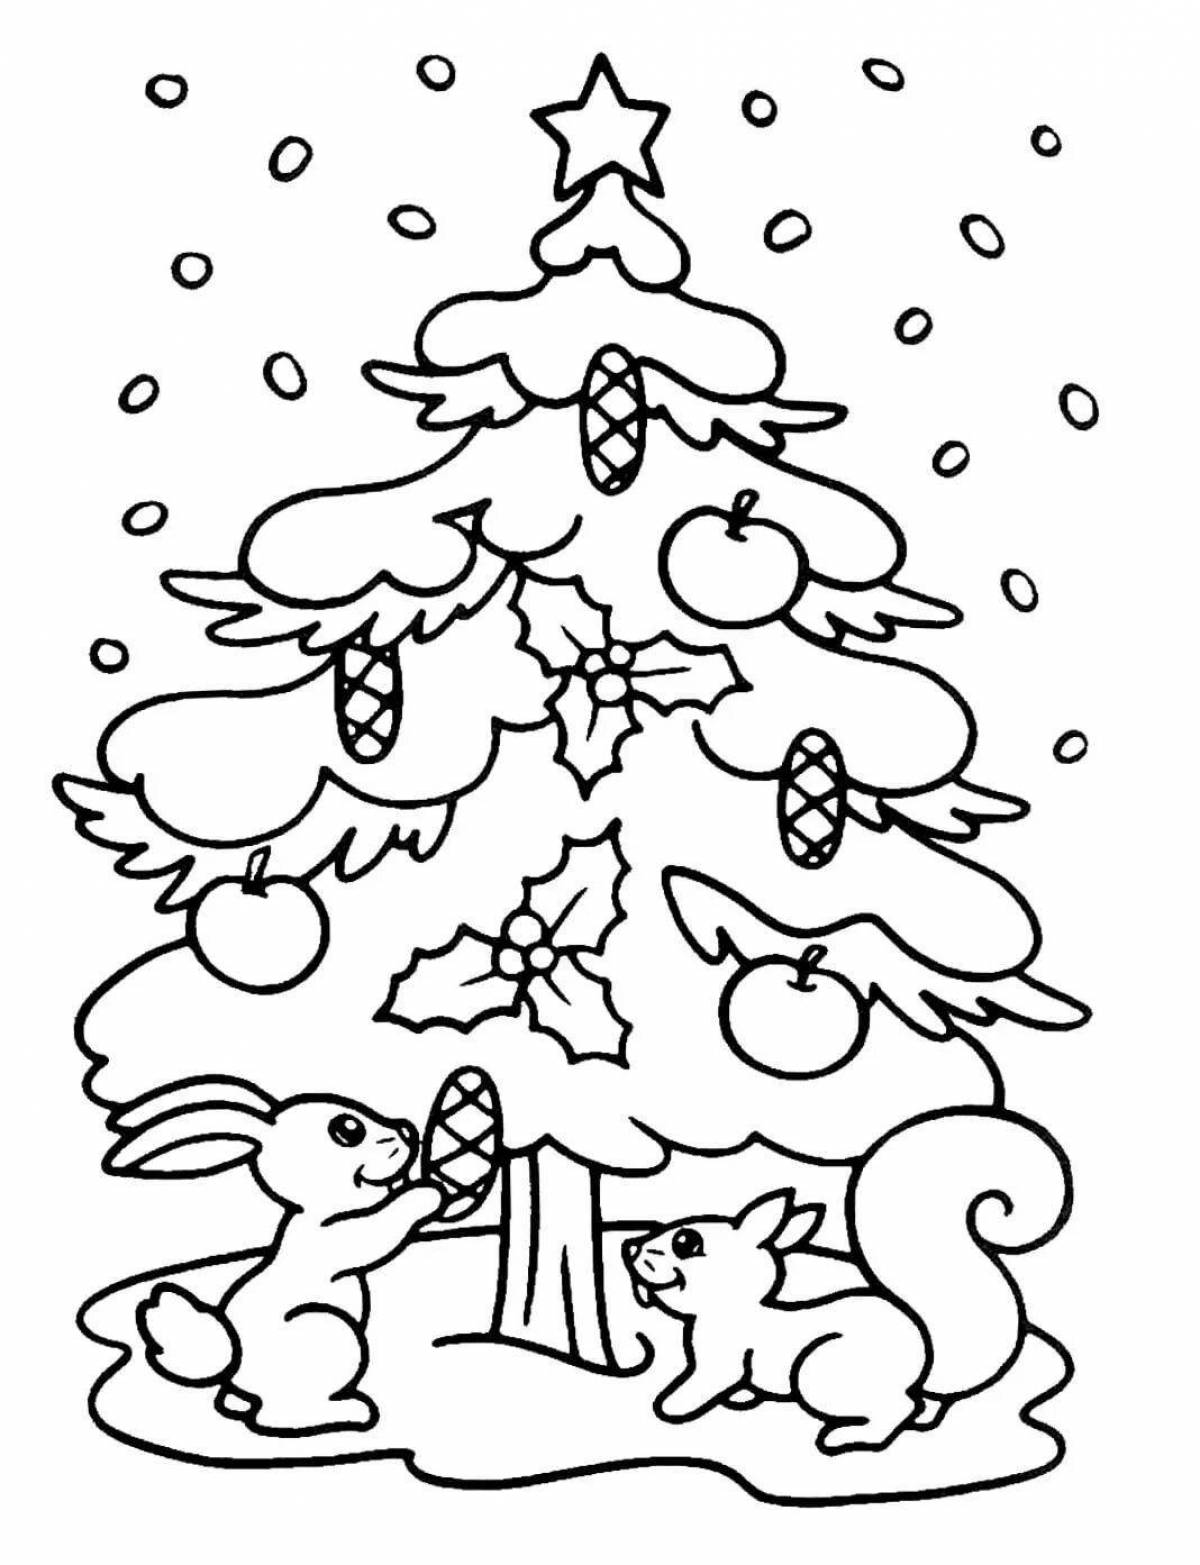 Magic Christmas tree coloring book for 6-7 year olds